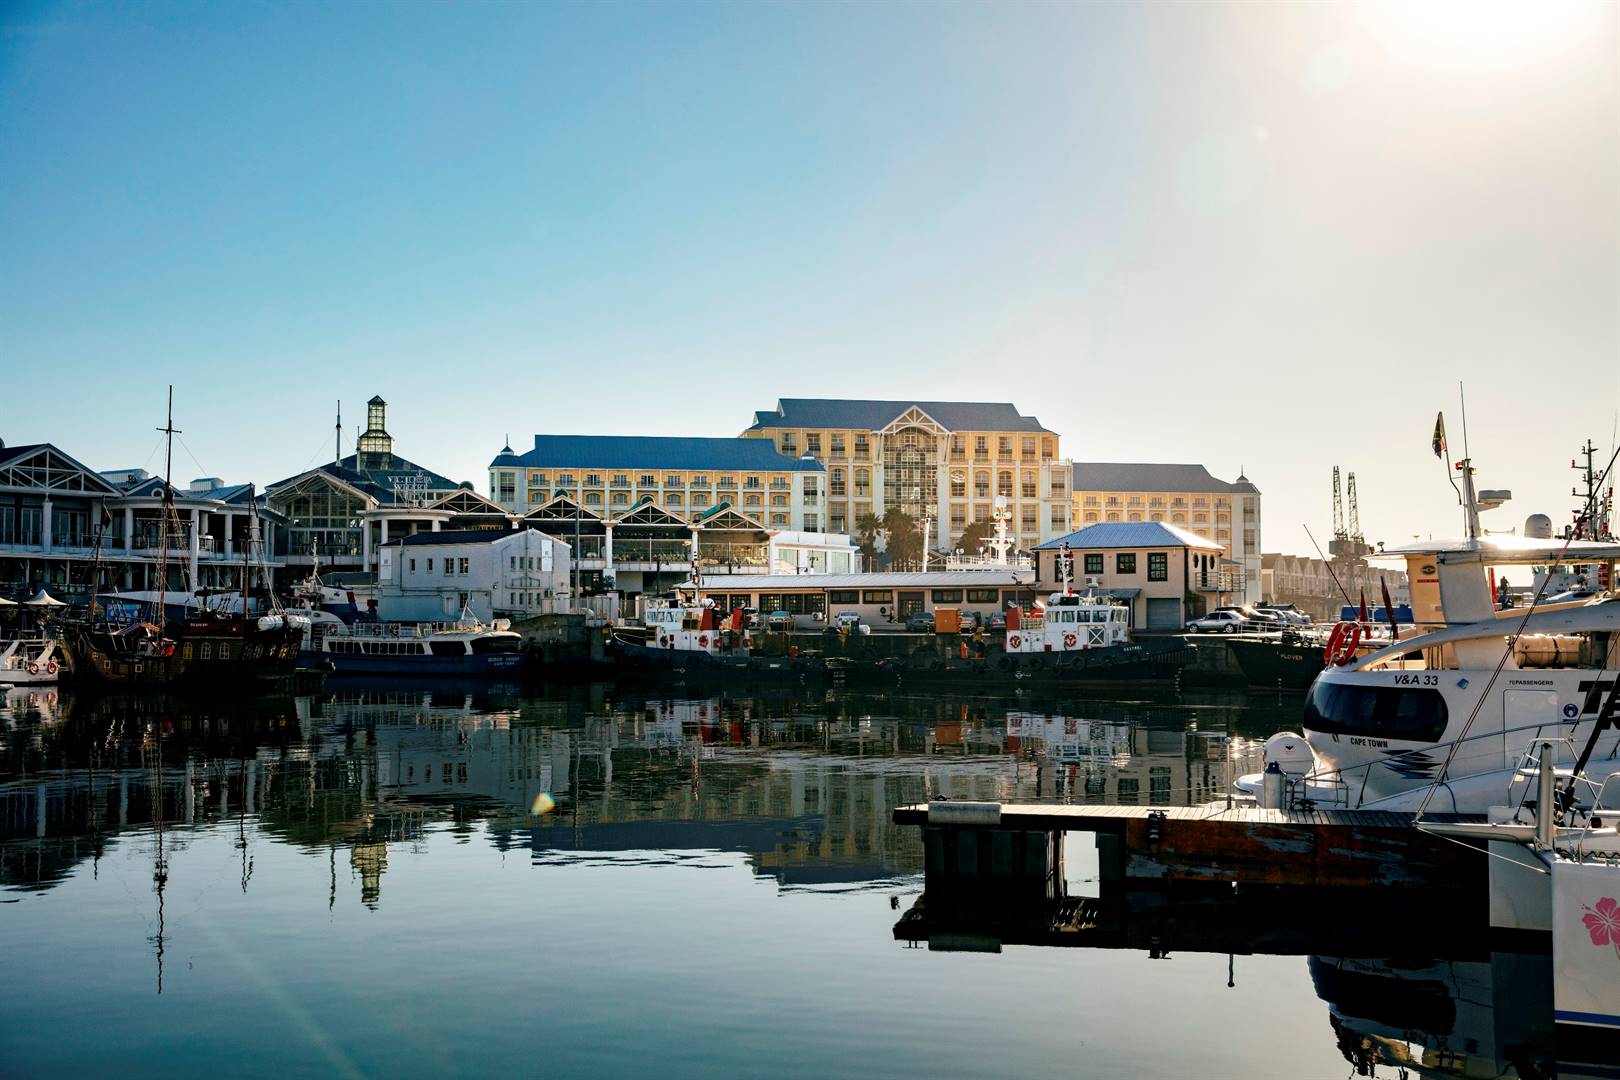 The Table Bay hotel at the V&A Waterfront.